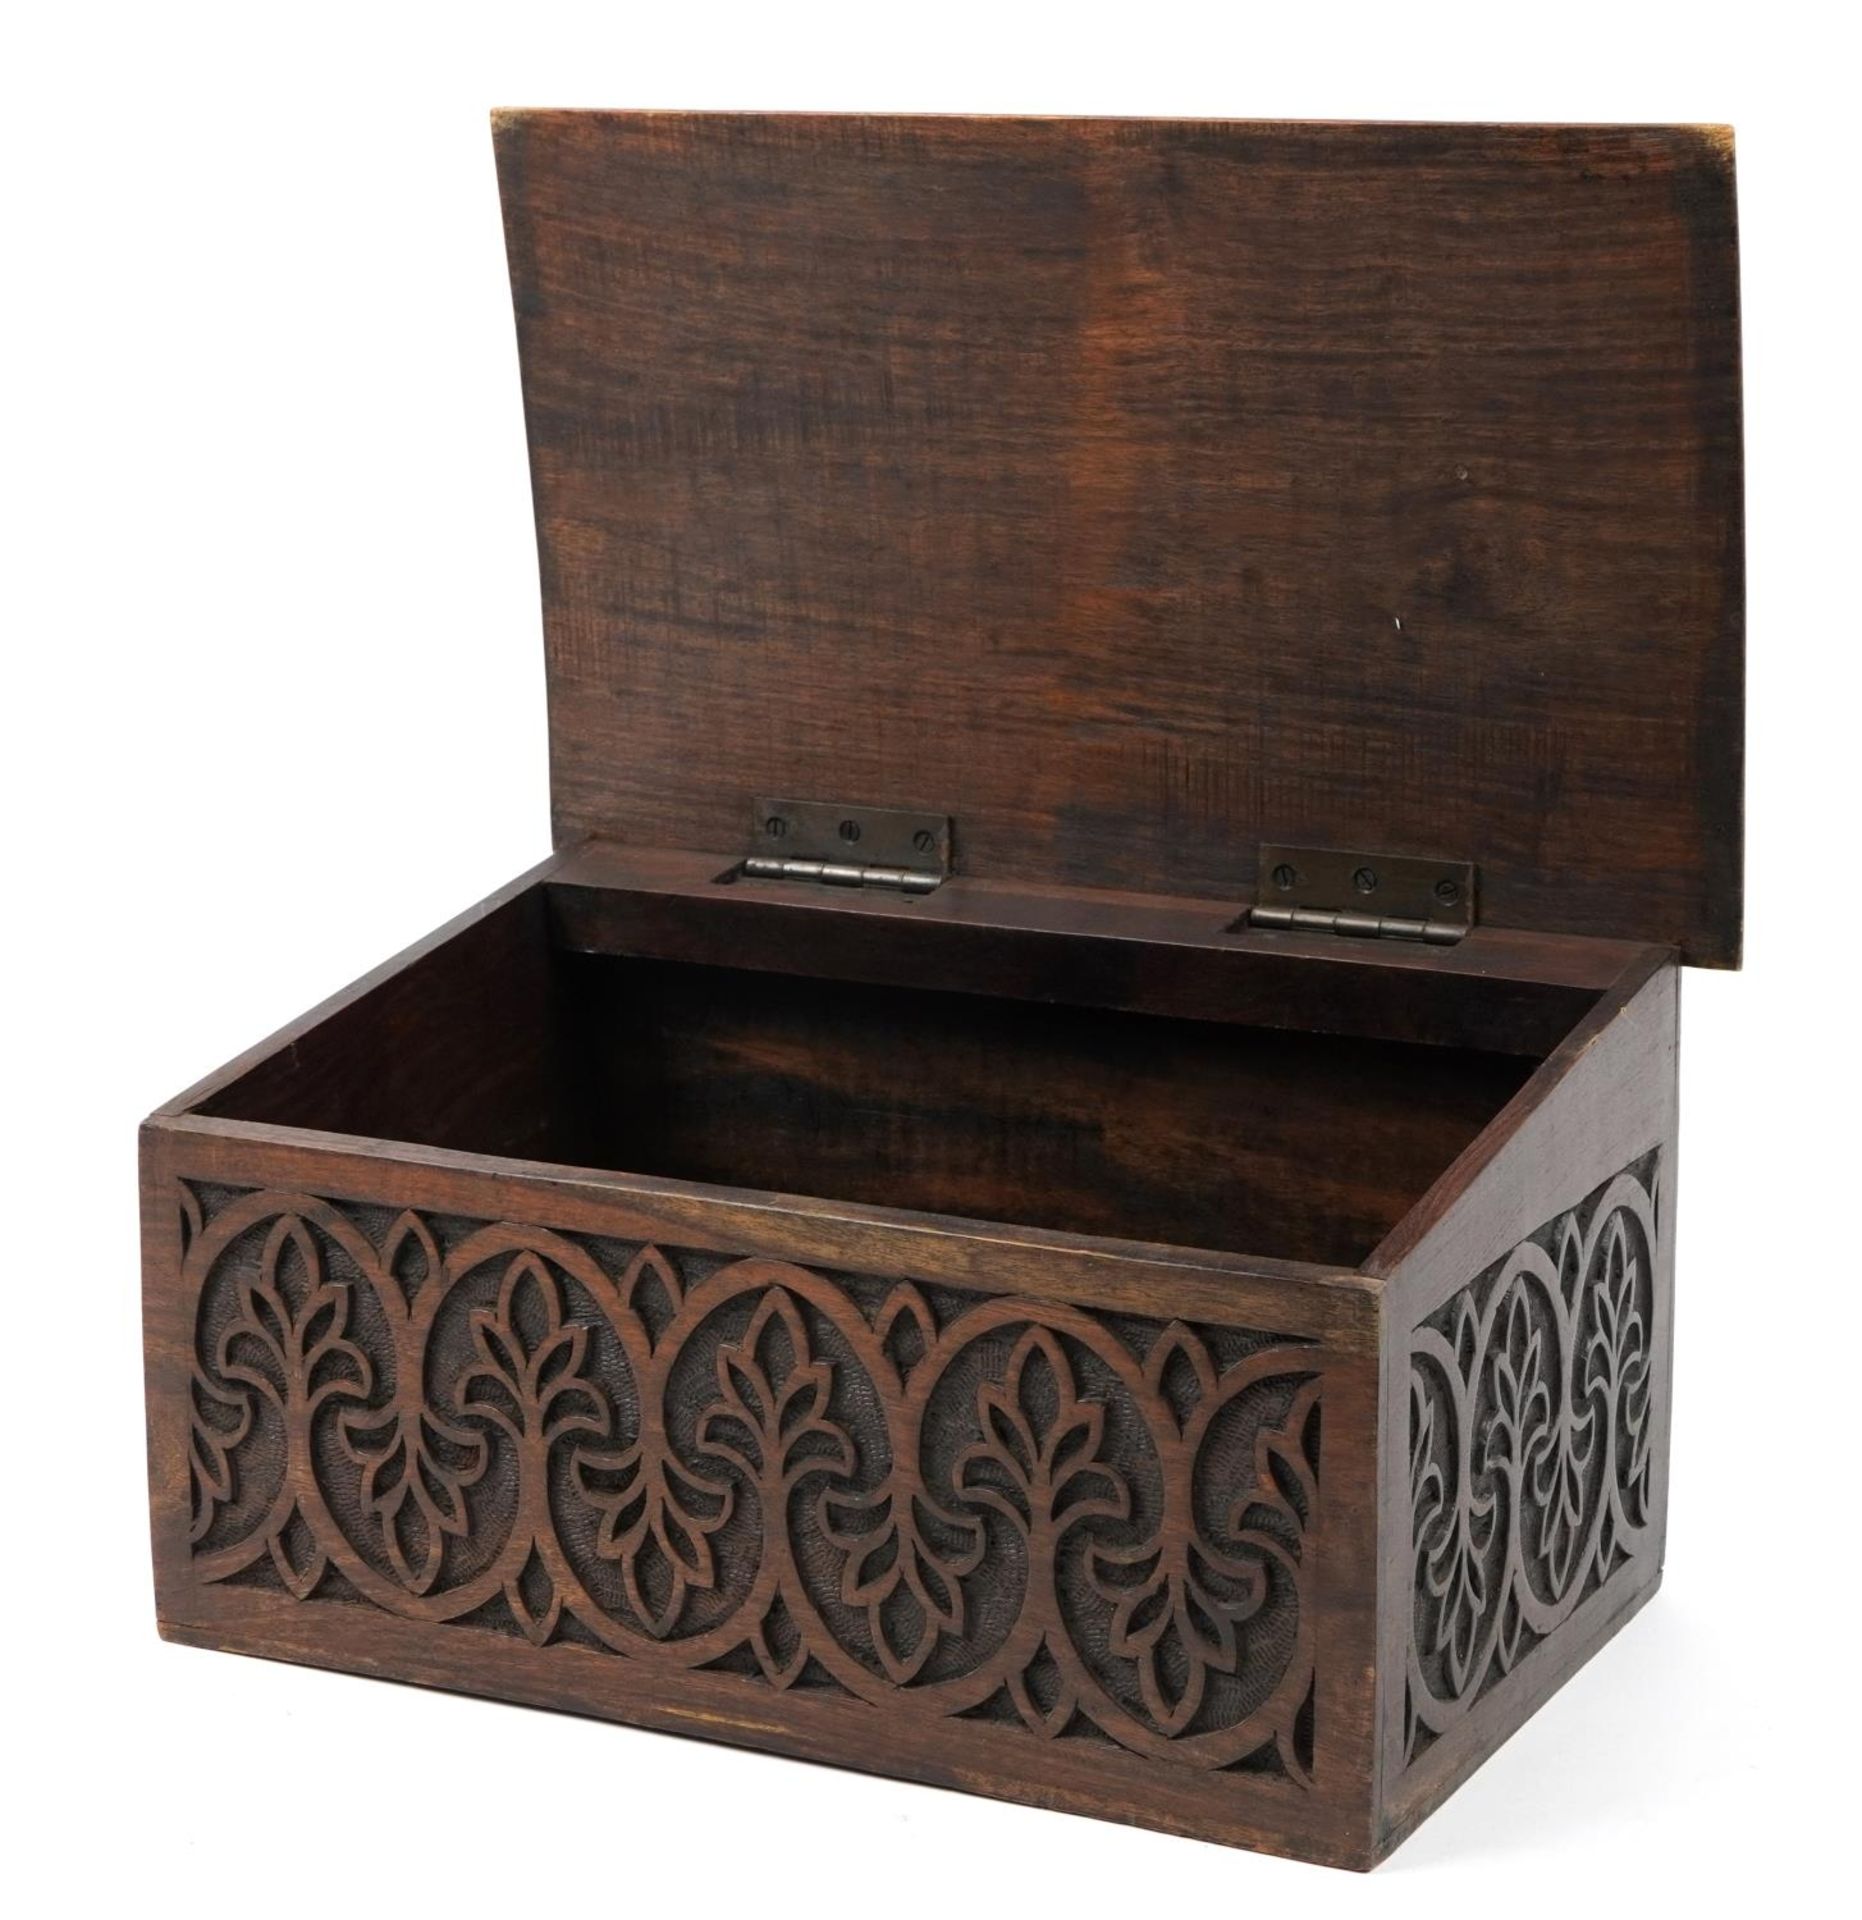 Hardwood bible box carved with flowers, 23cm H x 43.5cm W x 26cm D : For further information on this - Image 2 of 4